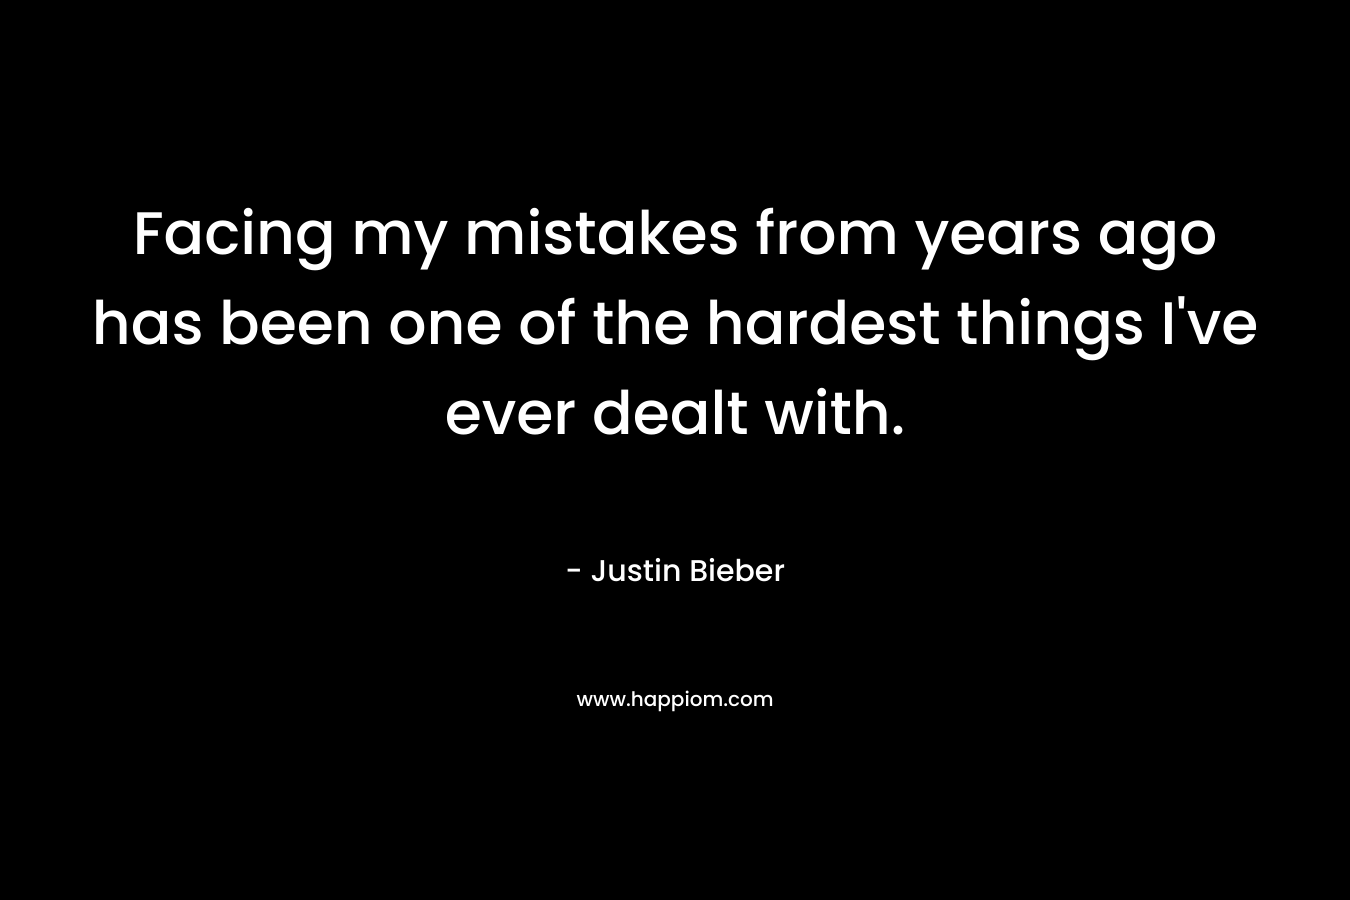 Facing my mistakes from years ago has been one of the hardest things I’ve ever dealt with. – Justin Bieber